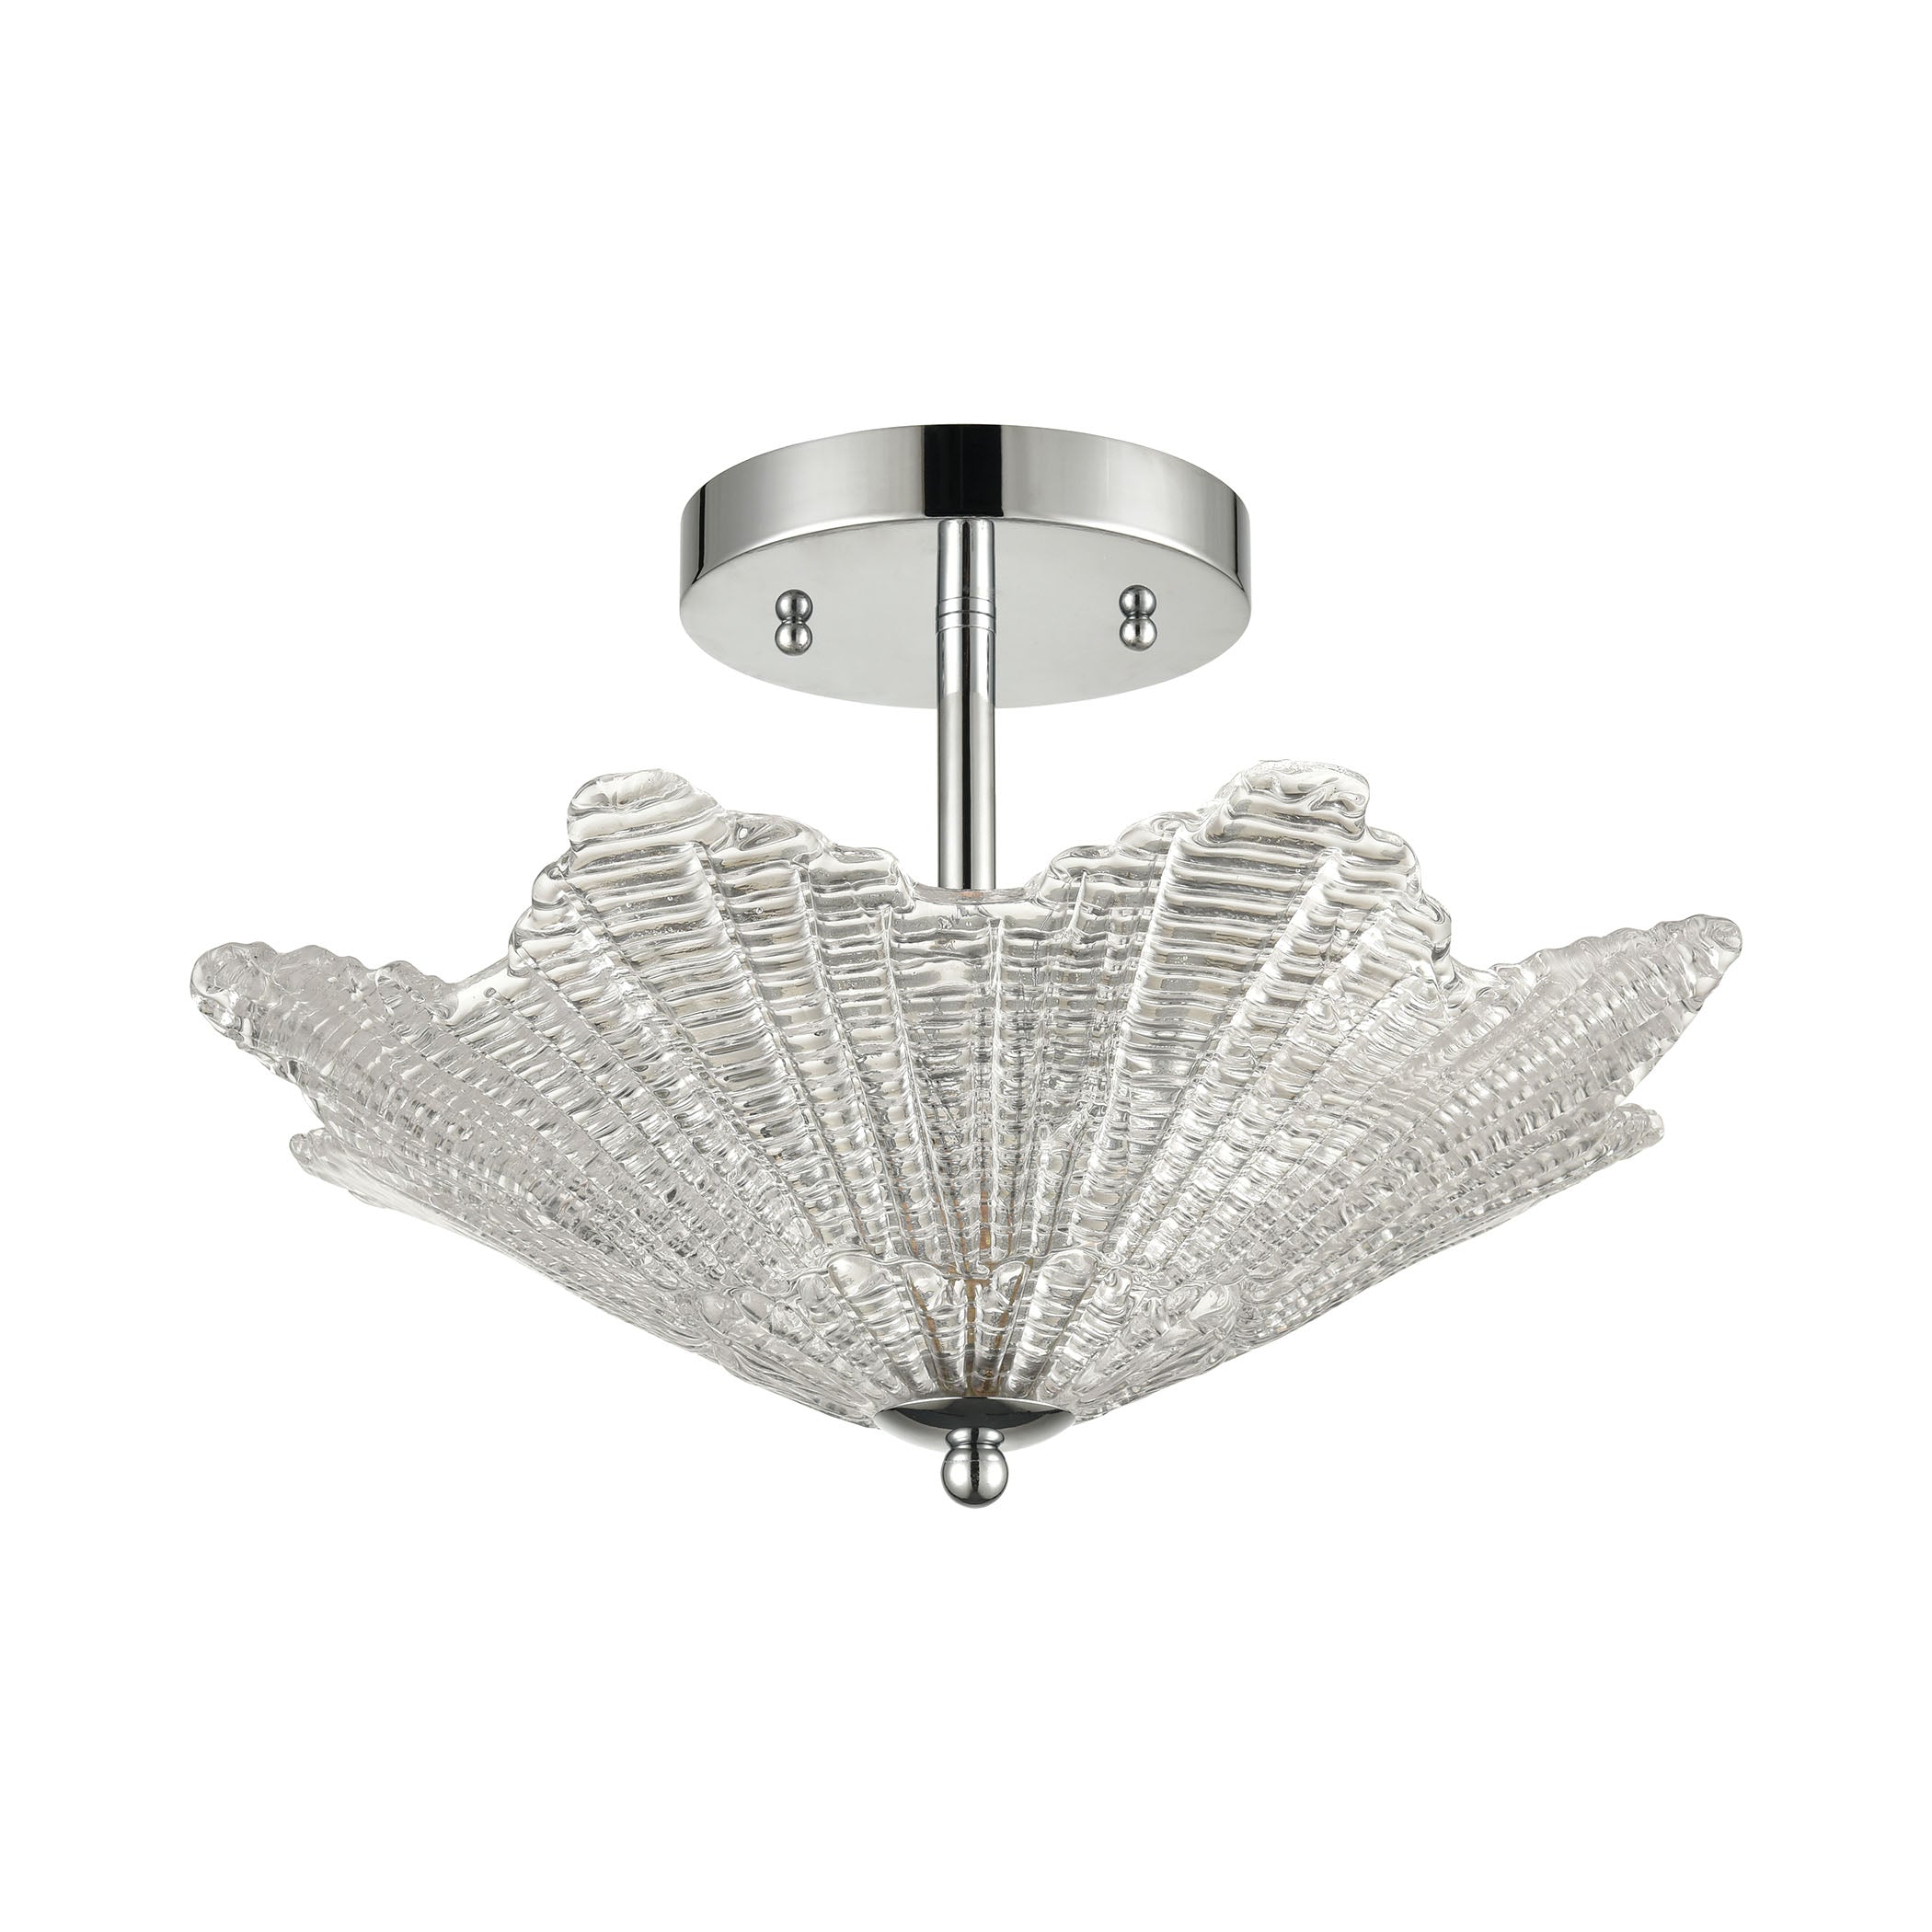 ELK Lighting 60174/3 Radiance 3-Light Semi Flush in Polished Chrome with Clear Textured Glass